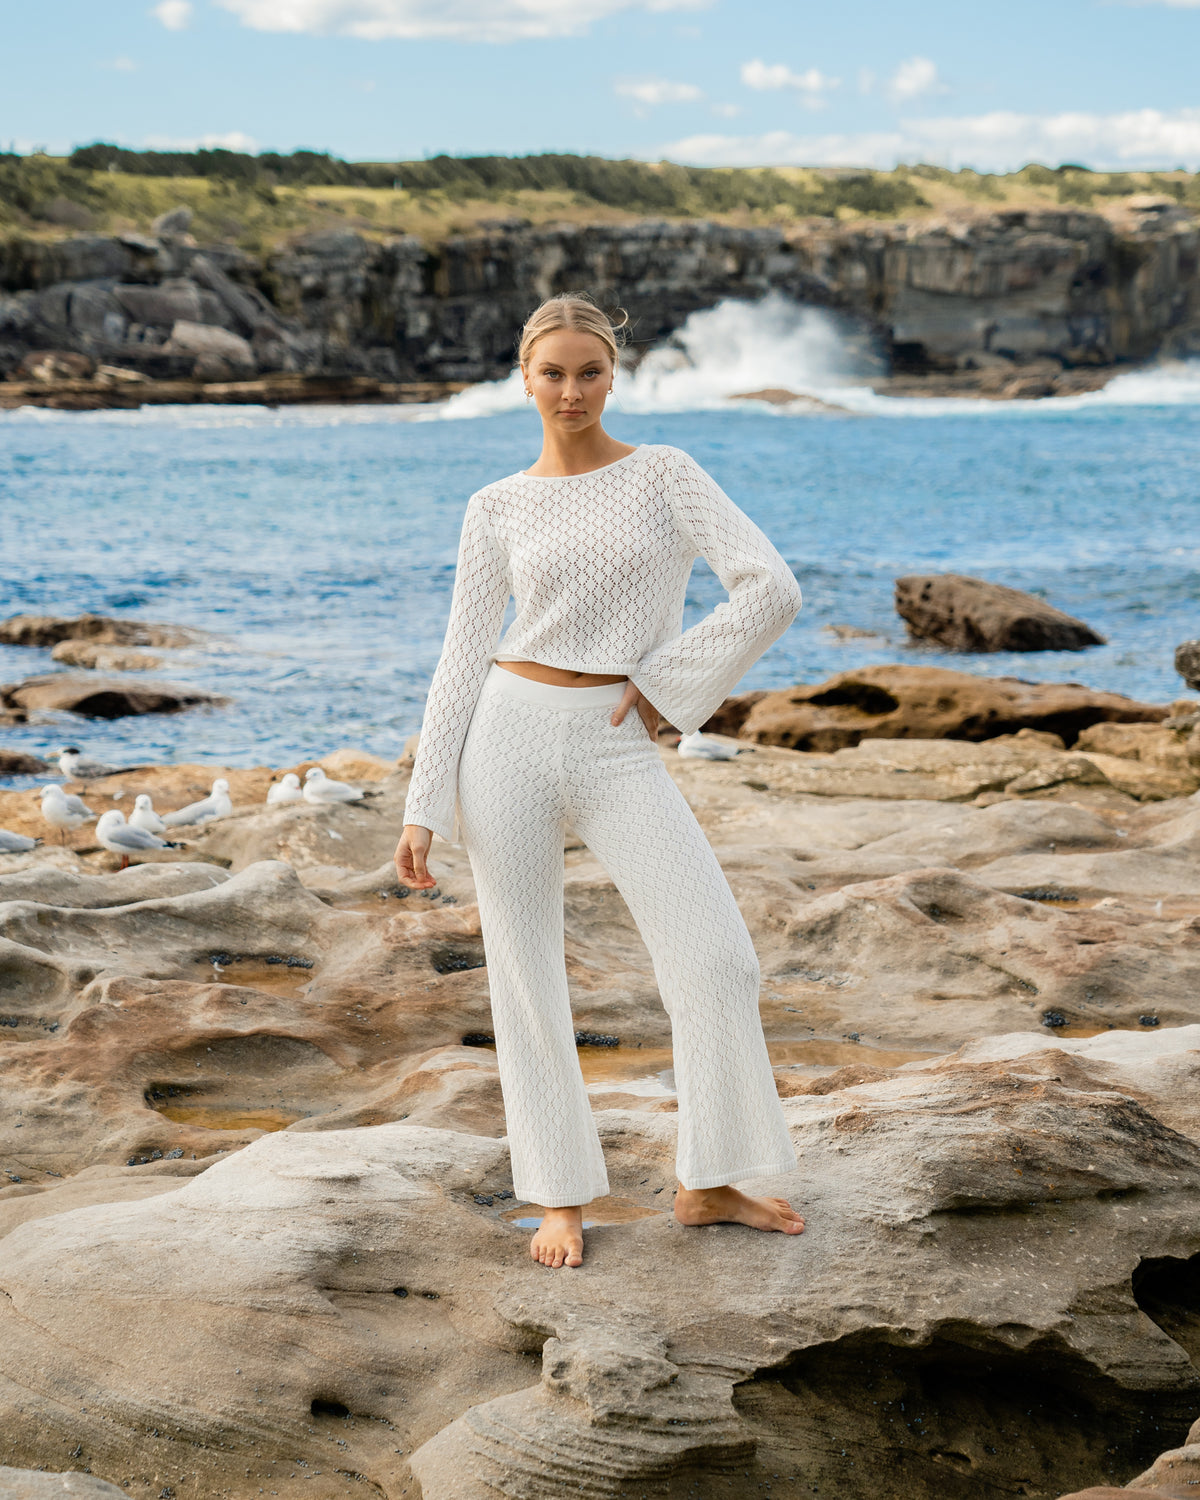 A model is at the beach wearing a white long-sleeve crochet top and white high waist crochet pants from the Paper Heart collection designed by Global Fashion House.